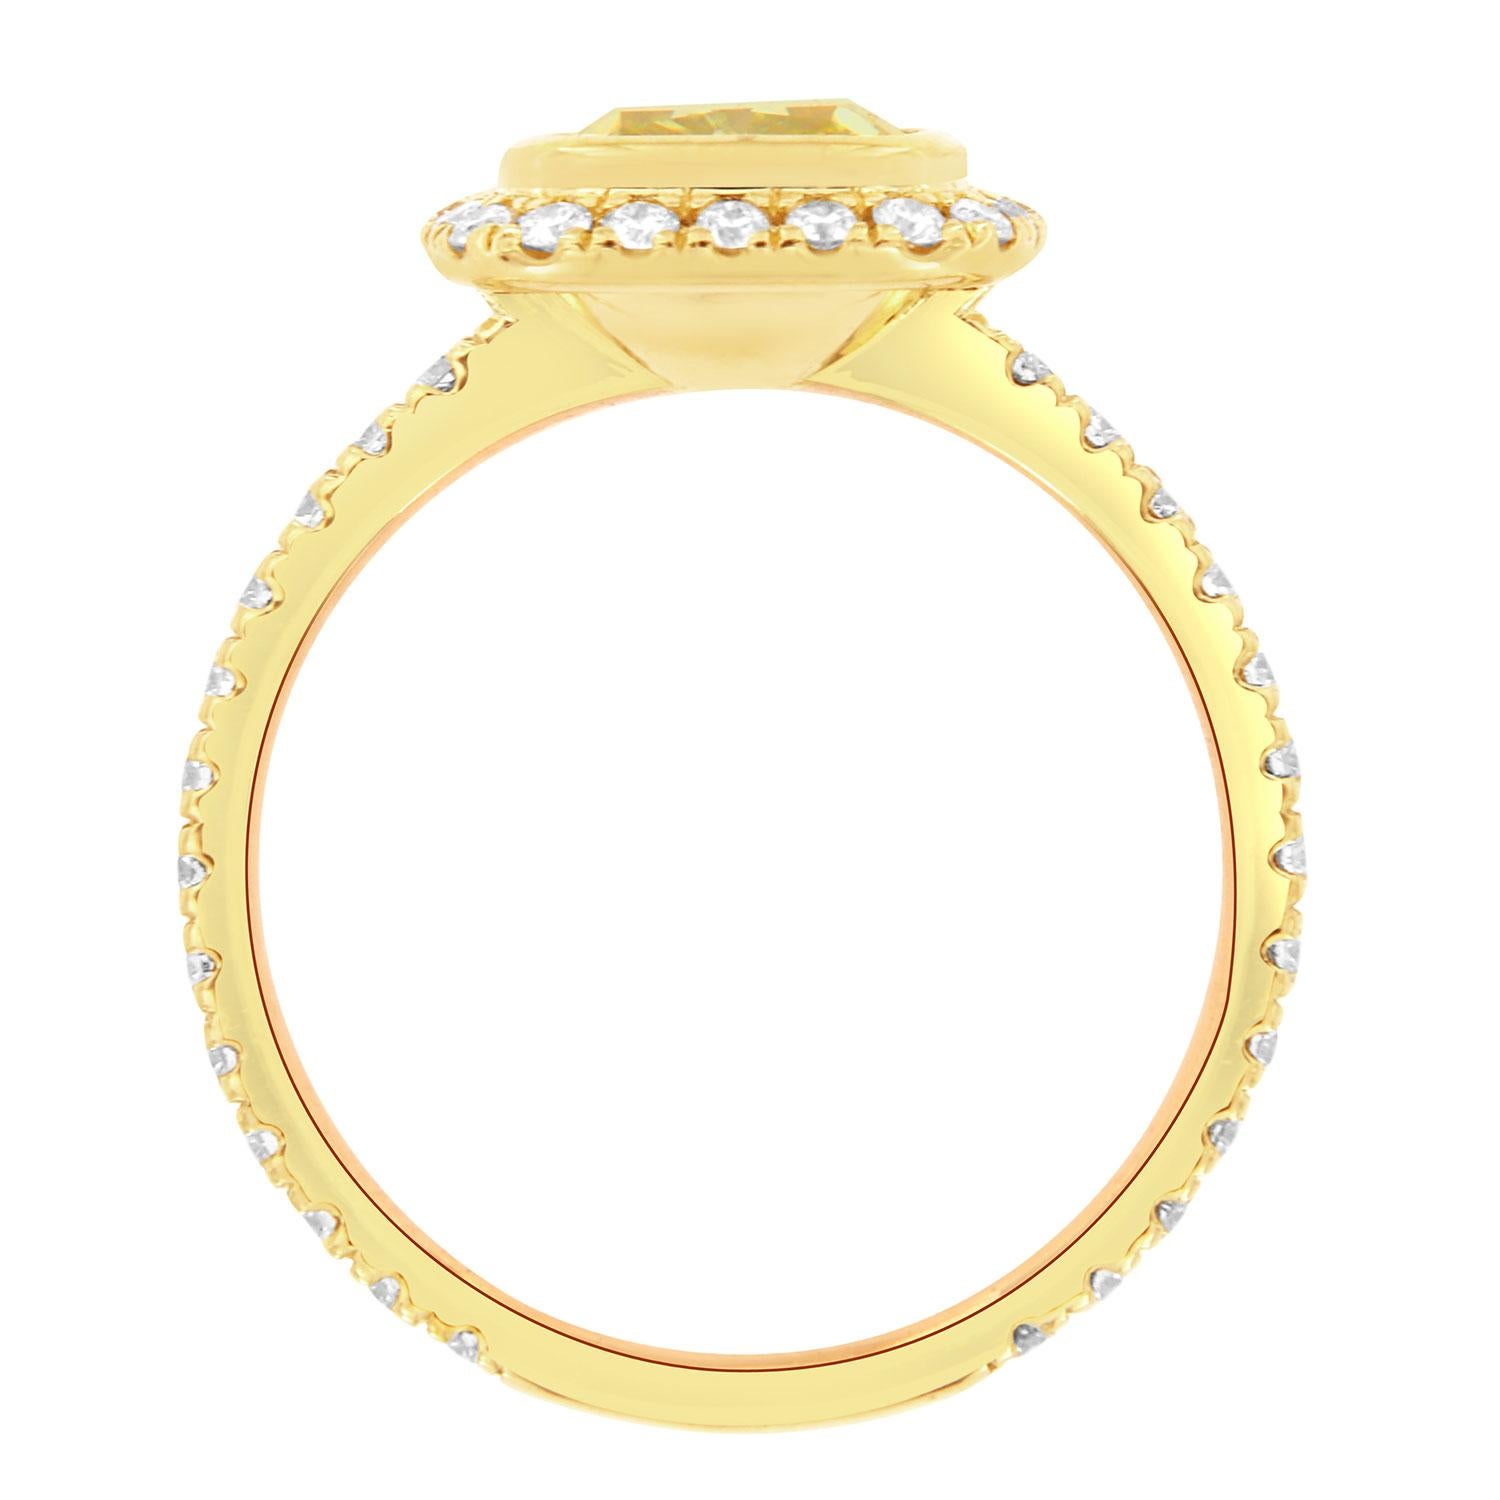 EGL USA 1.52 Carat Elongated Cushion Yellow Diamond Halo 18K Yellow Gold Ring In New Condition For Sale In San Francisco, CA